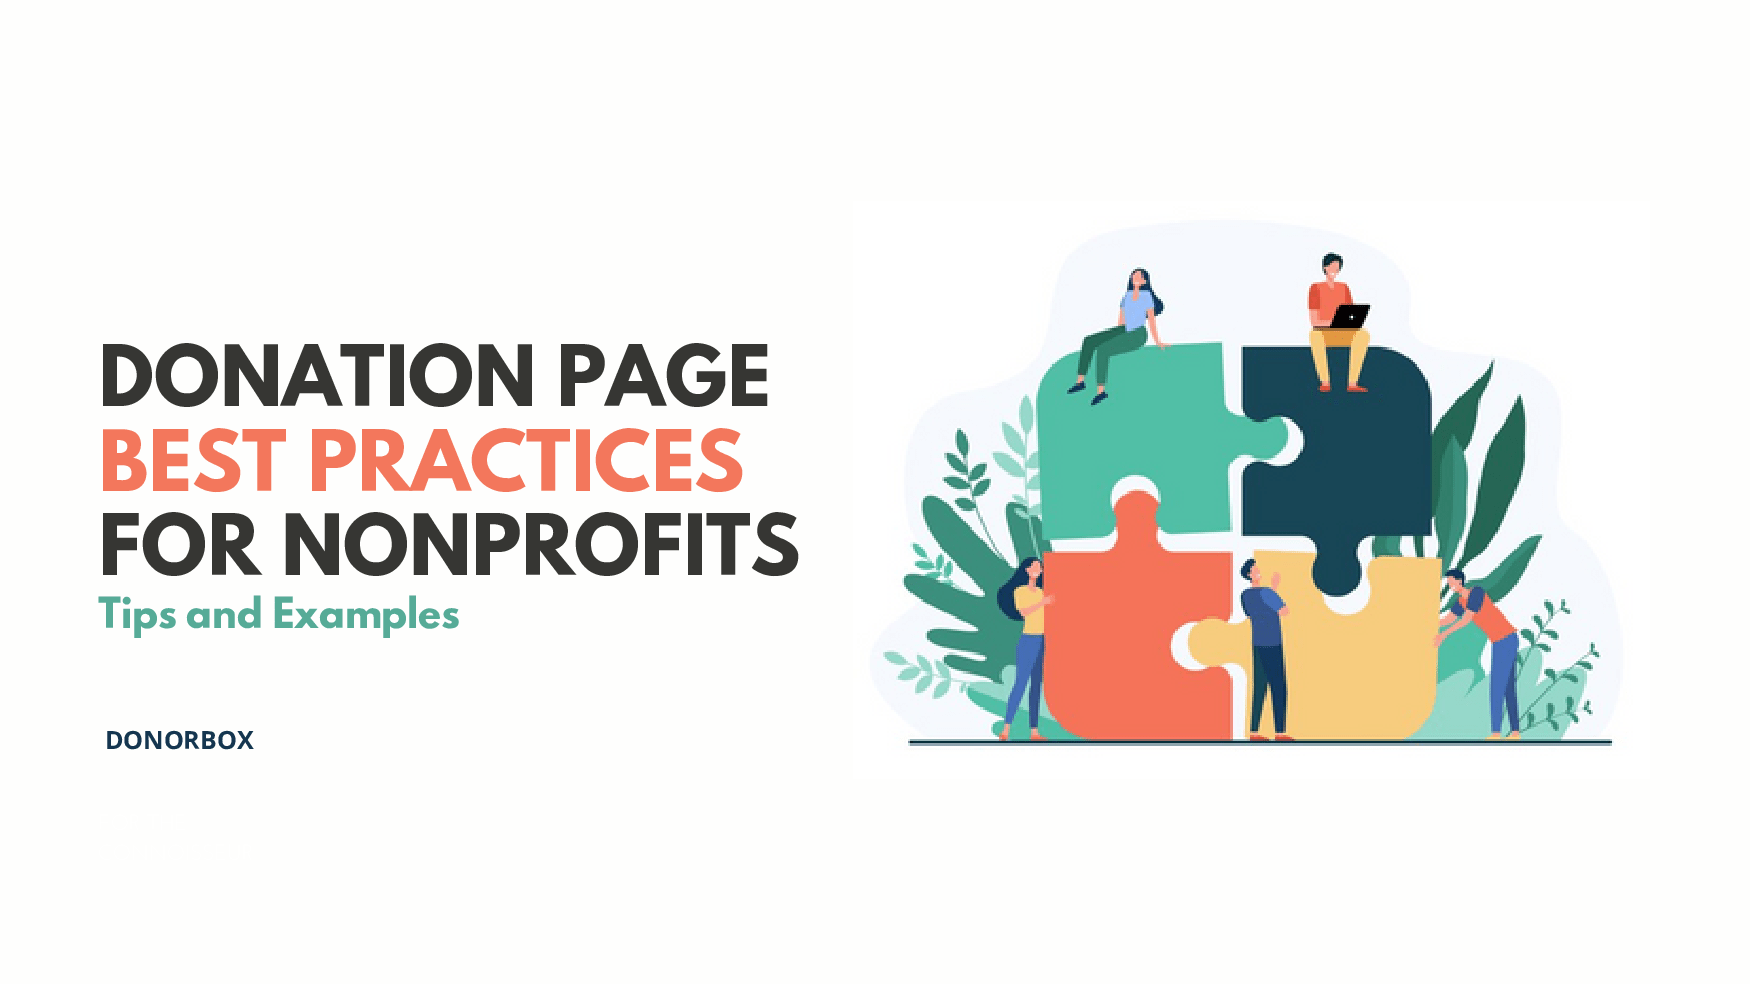 27 Donation Page Best Practices For Nonprofits – Tips and Examples